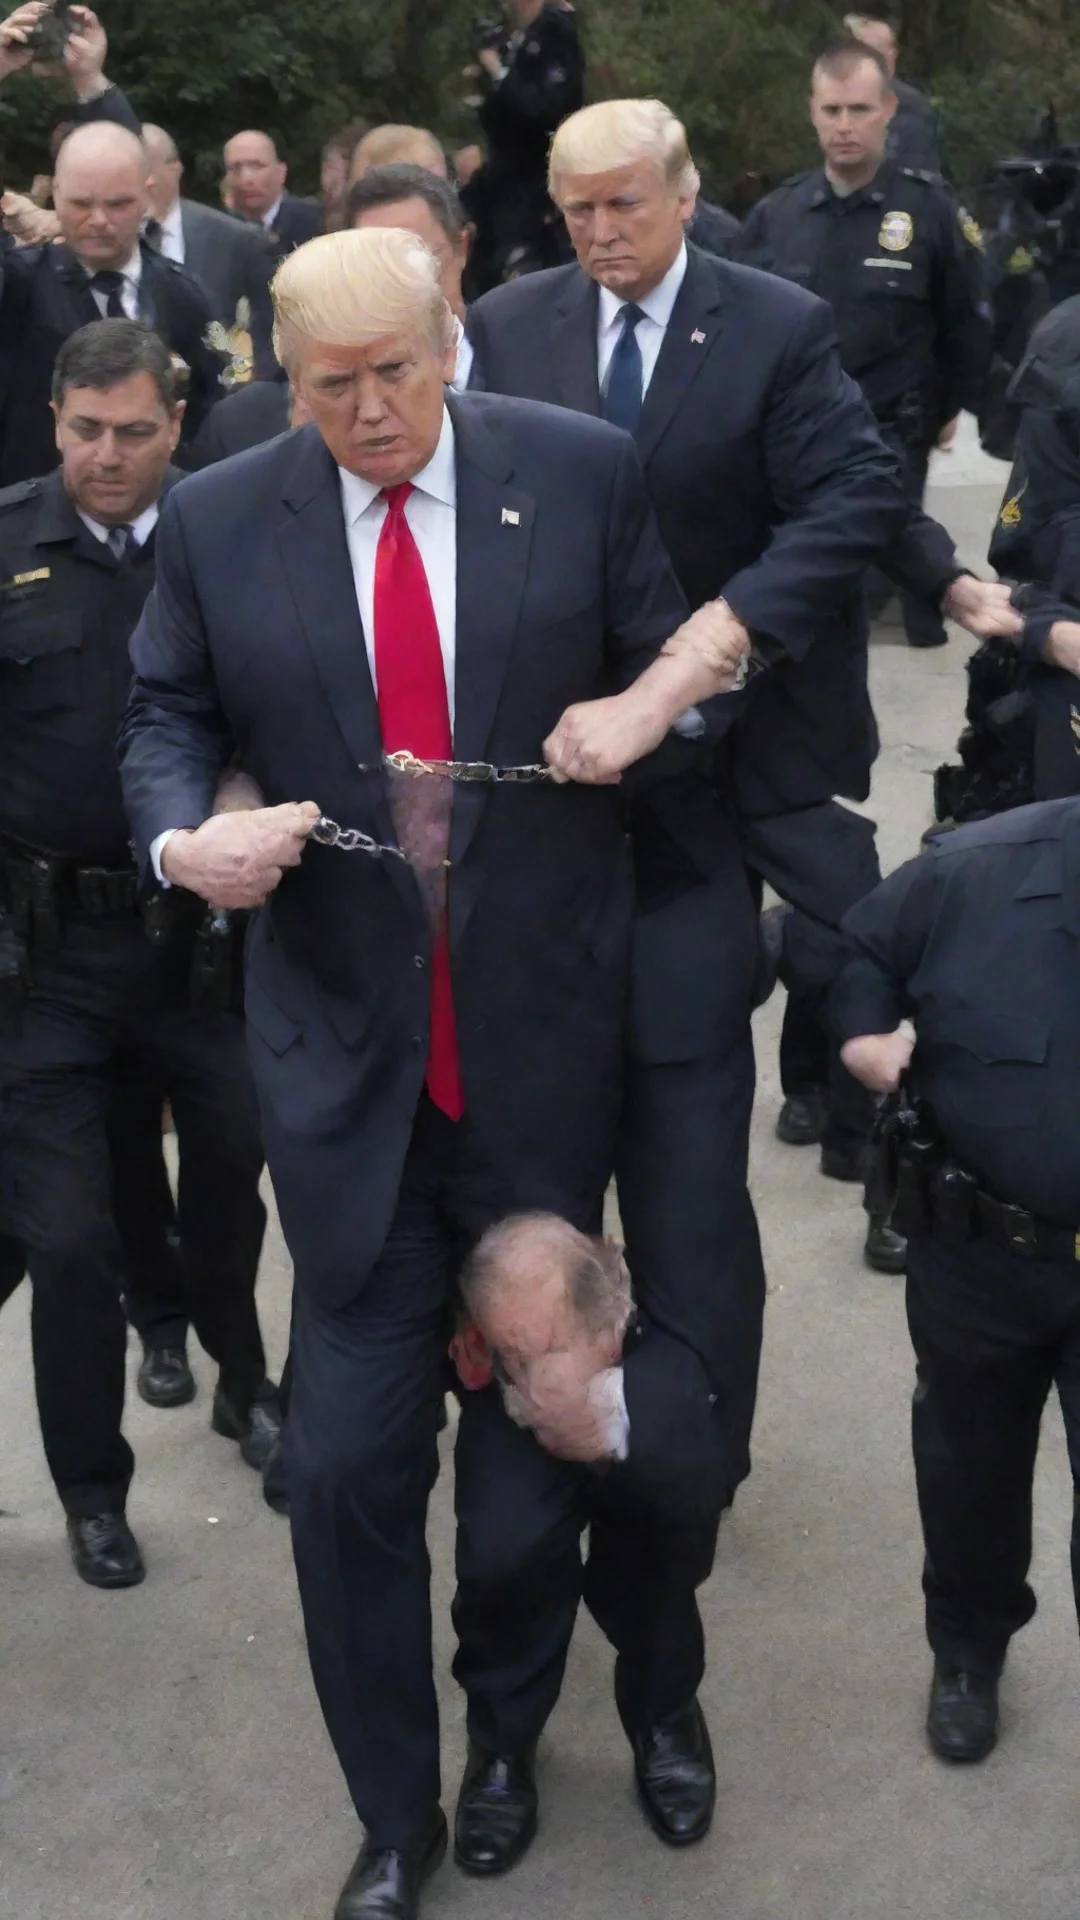 donald trump being led away in handcuffs tall